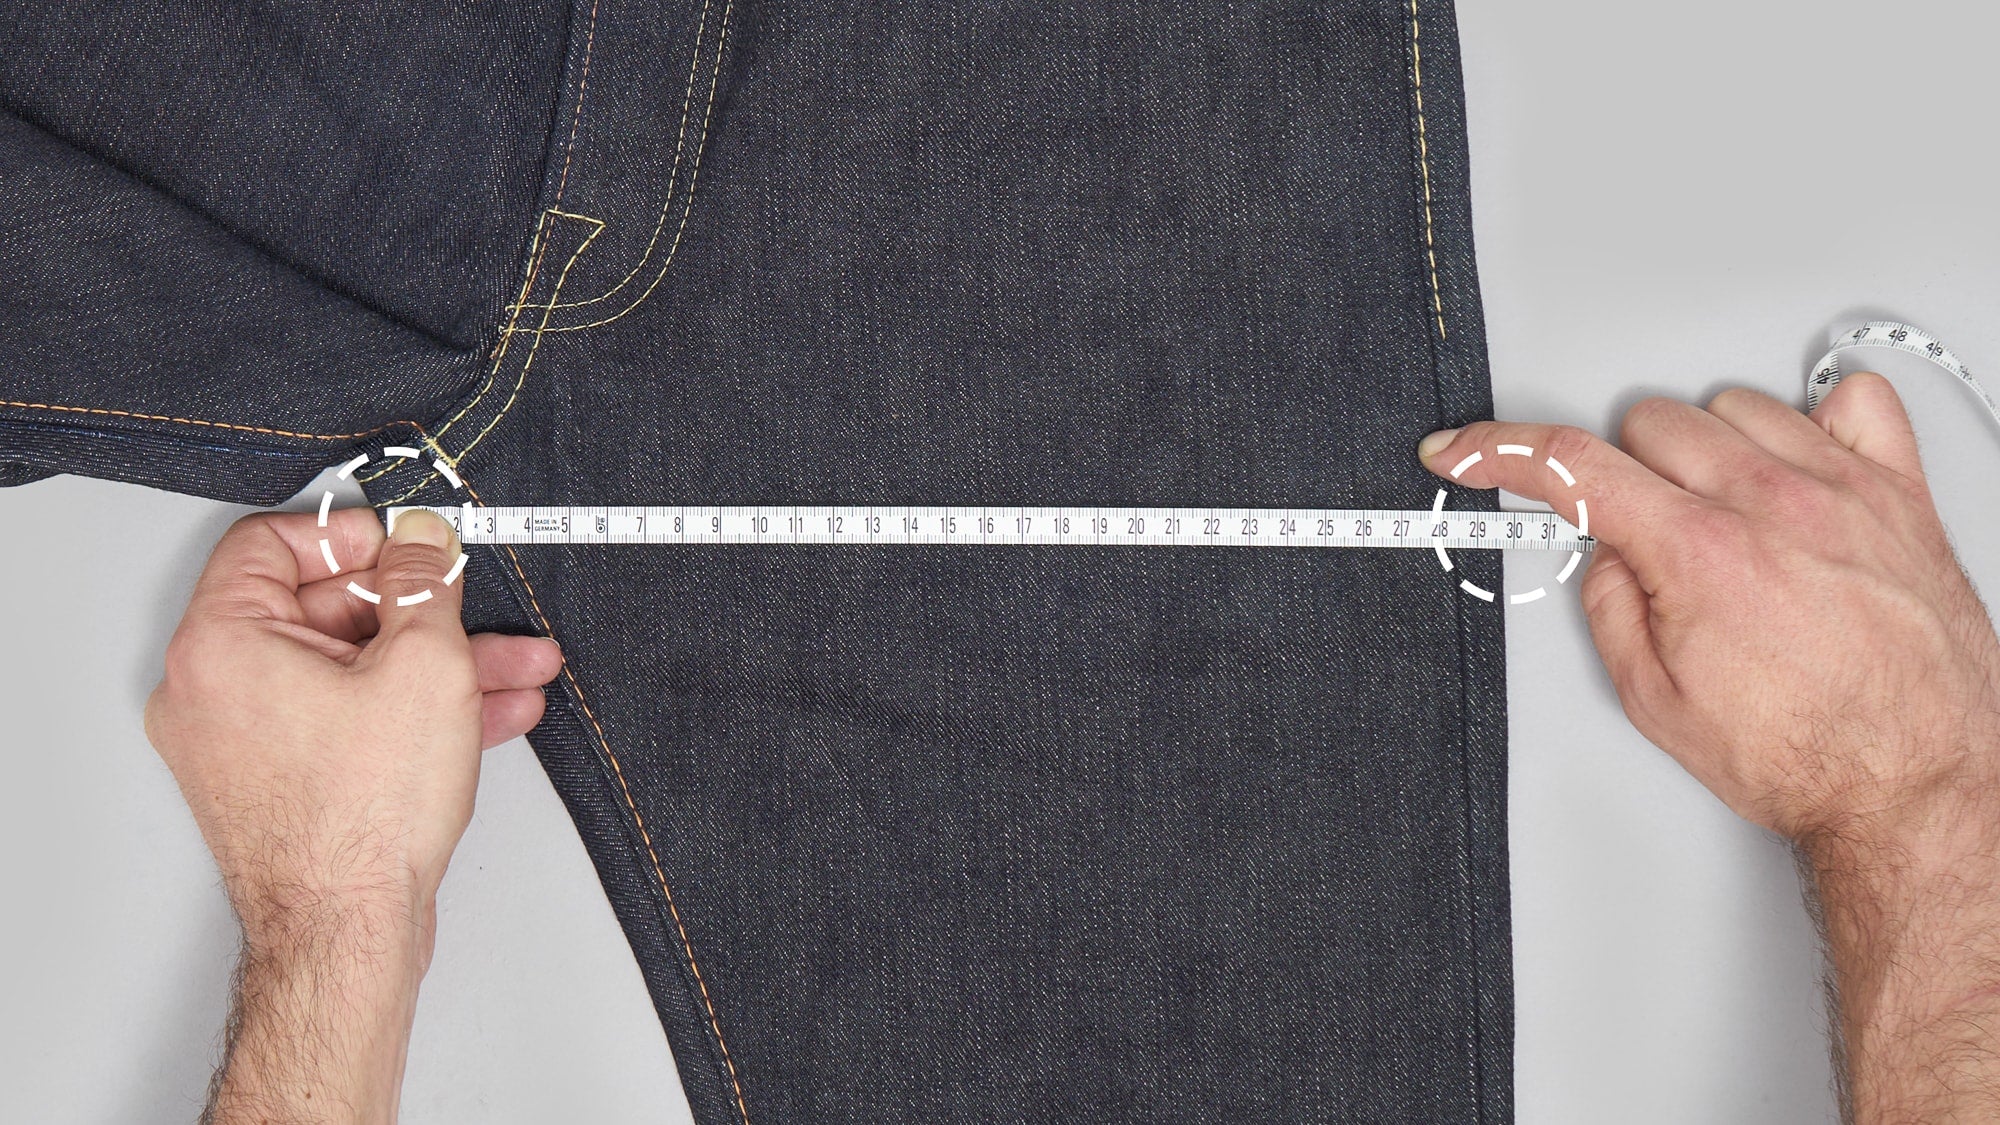 How We Measure Our Clothes